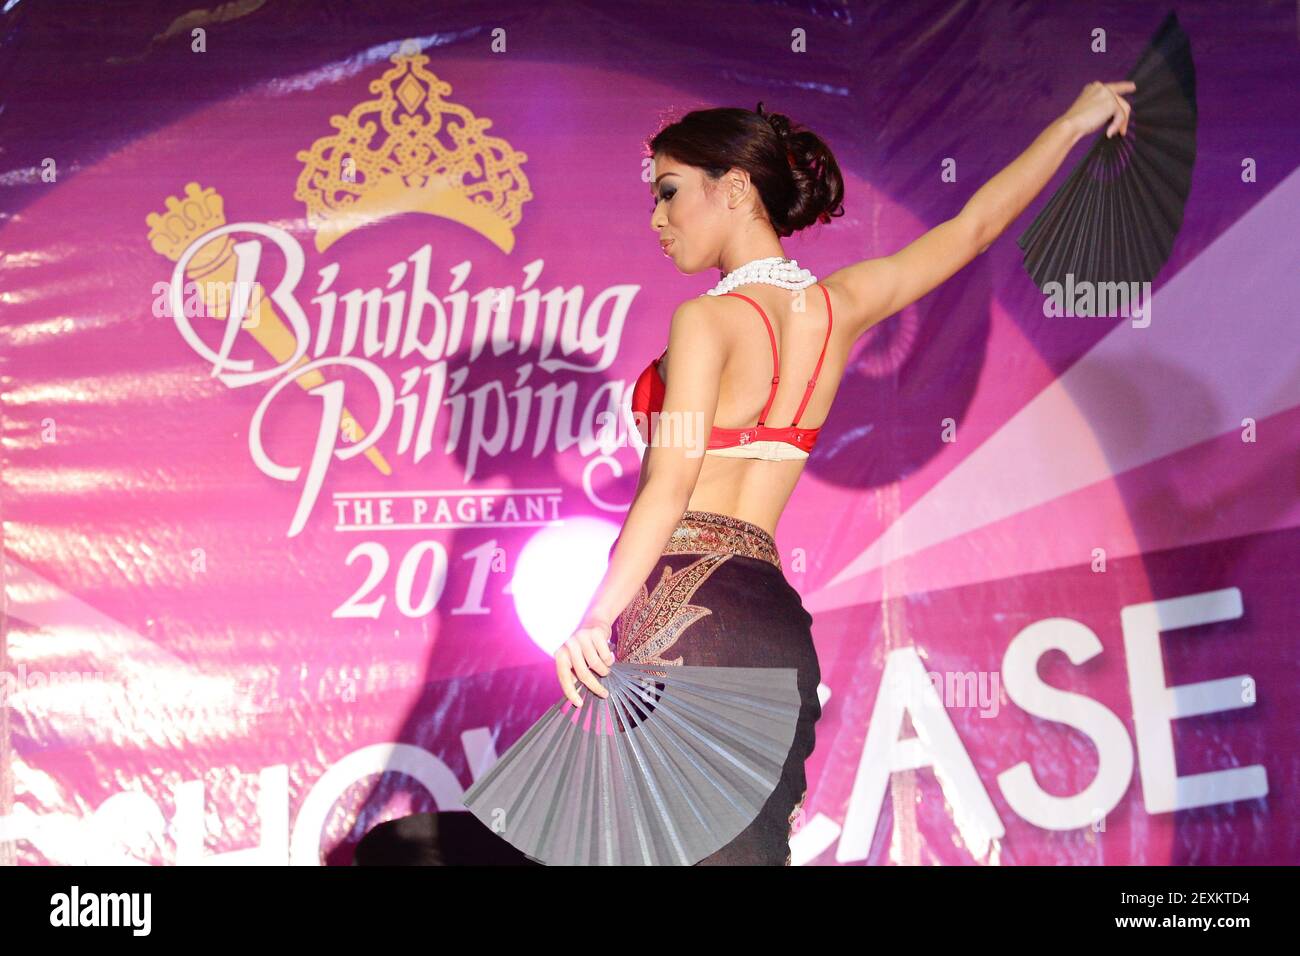 Quezon City, Philippines - A beauty pageant candidate performs an ethnic dance during the talent show portion of the Binibining Pilipinas 2014 held on Valentine's Day. The winners of the competition will represent the Philippines in different international beaty pageant contests. (Photo by Mark Cristino/Pacific Press/Sipa USA) Stock Photo